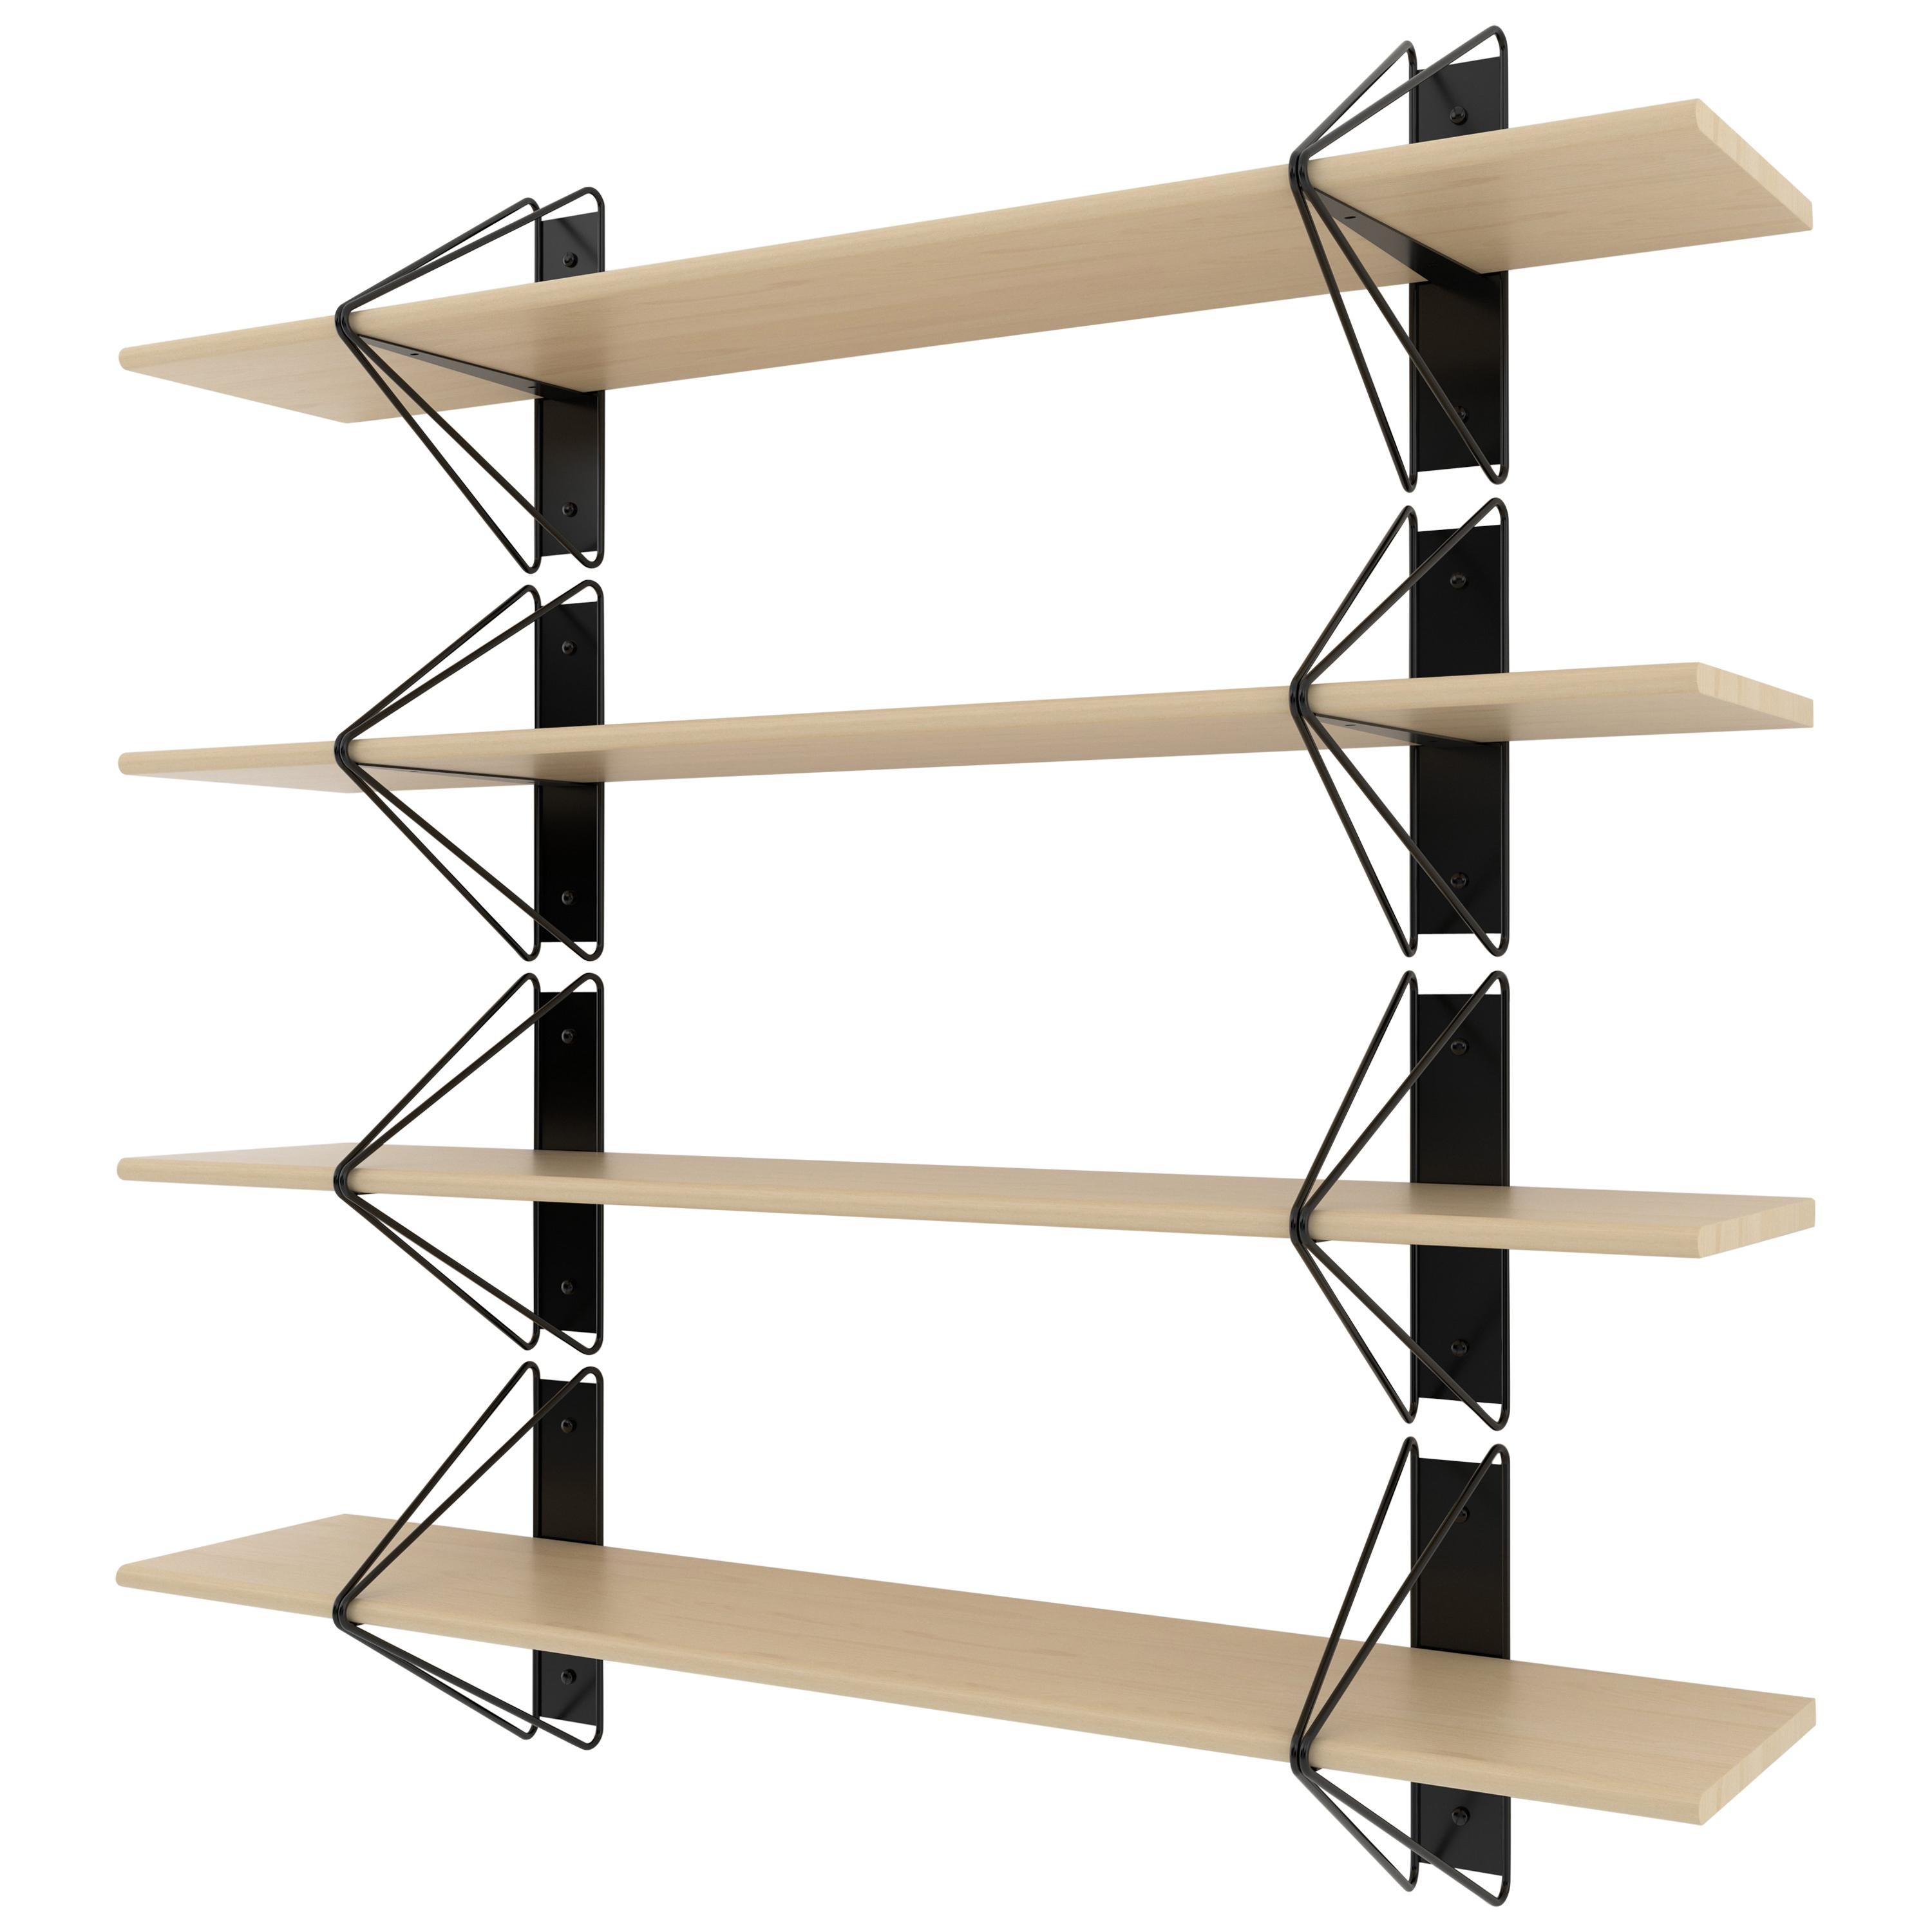 American Set of 2 Strut Shelves from Souda, Black, Made to Order For Sale